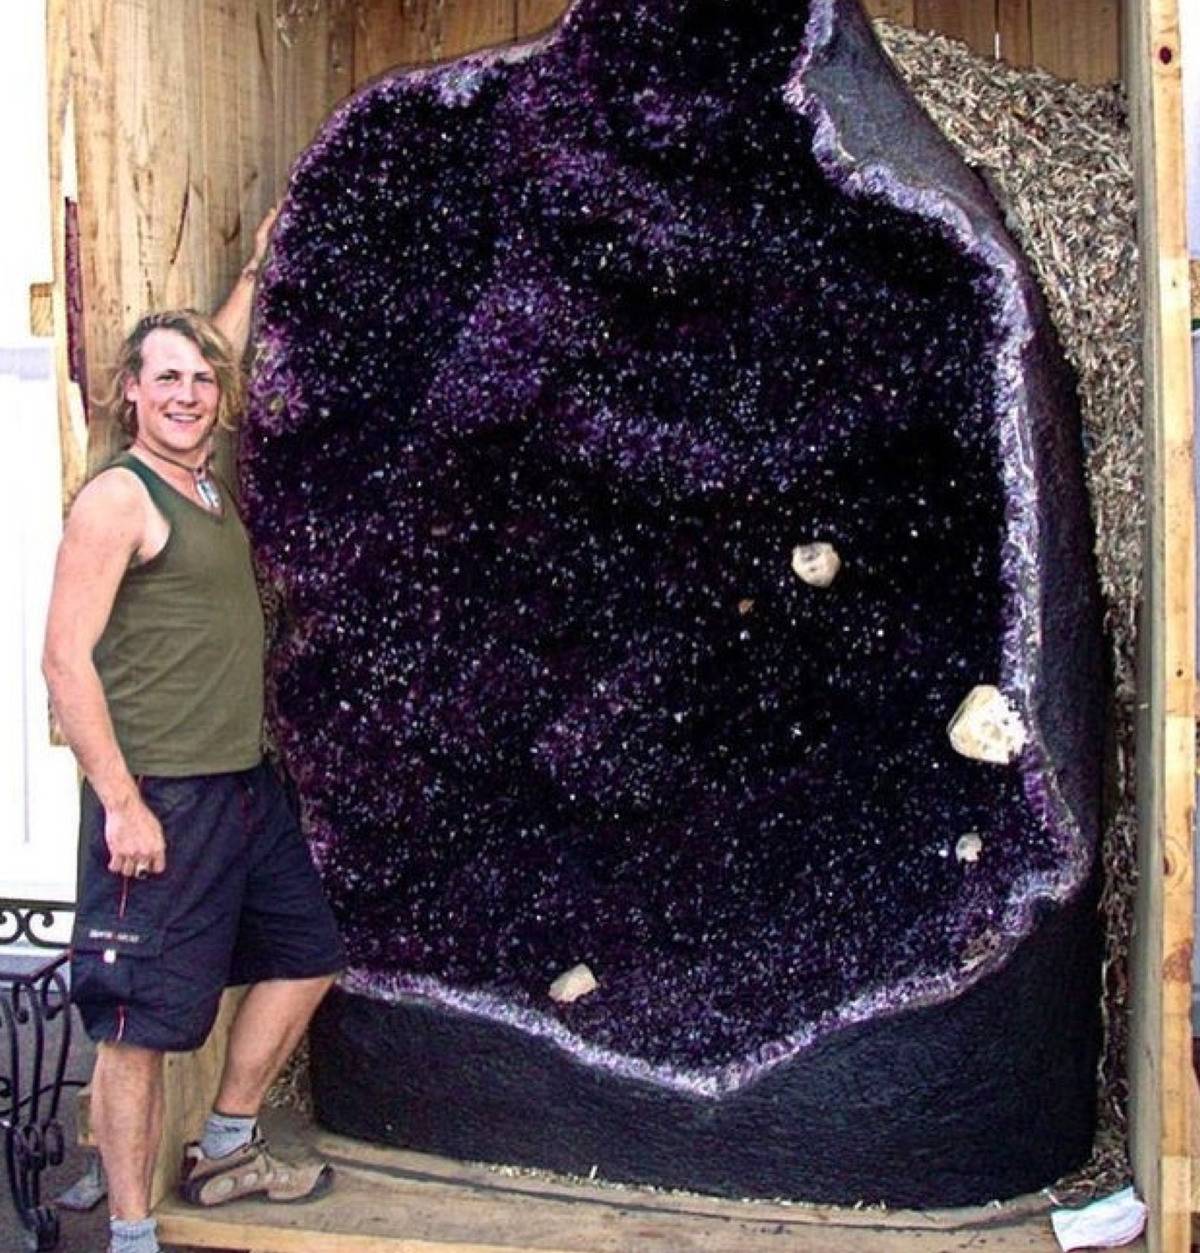 <p>This massive amethyst straight-up looks like the portal to the Nether in <i>Minecraft</i>. I had no idea that quartz rocks could be this big. </p> <p>Everything else aside, the purple color of this is <i>beautiful</i>. </p>